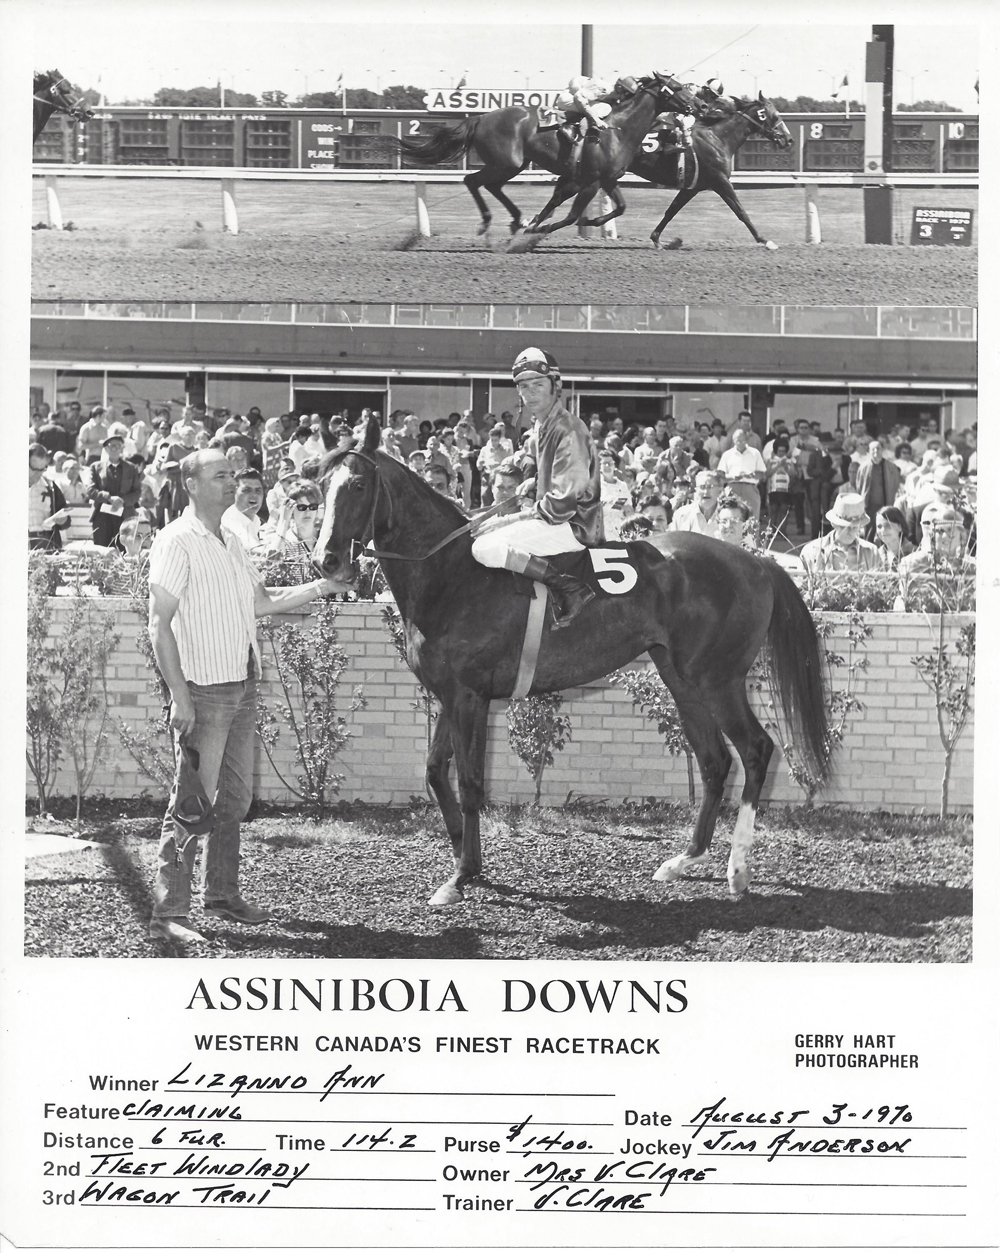 The Clare's first winner. Lizanno Ann. August 3, 1970